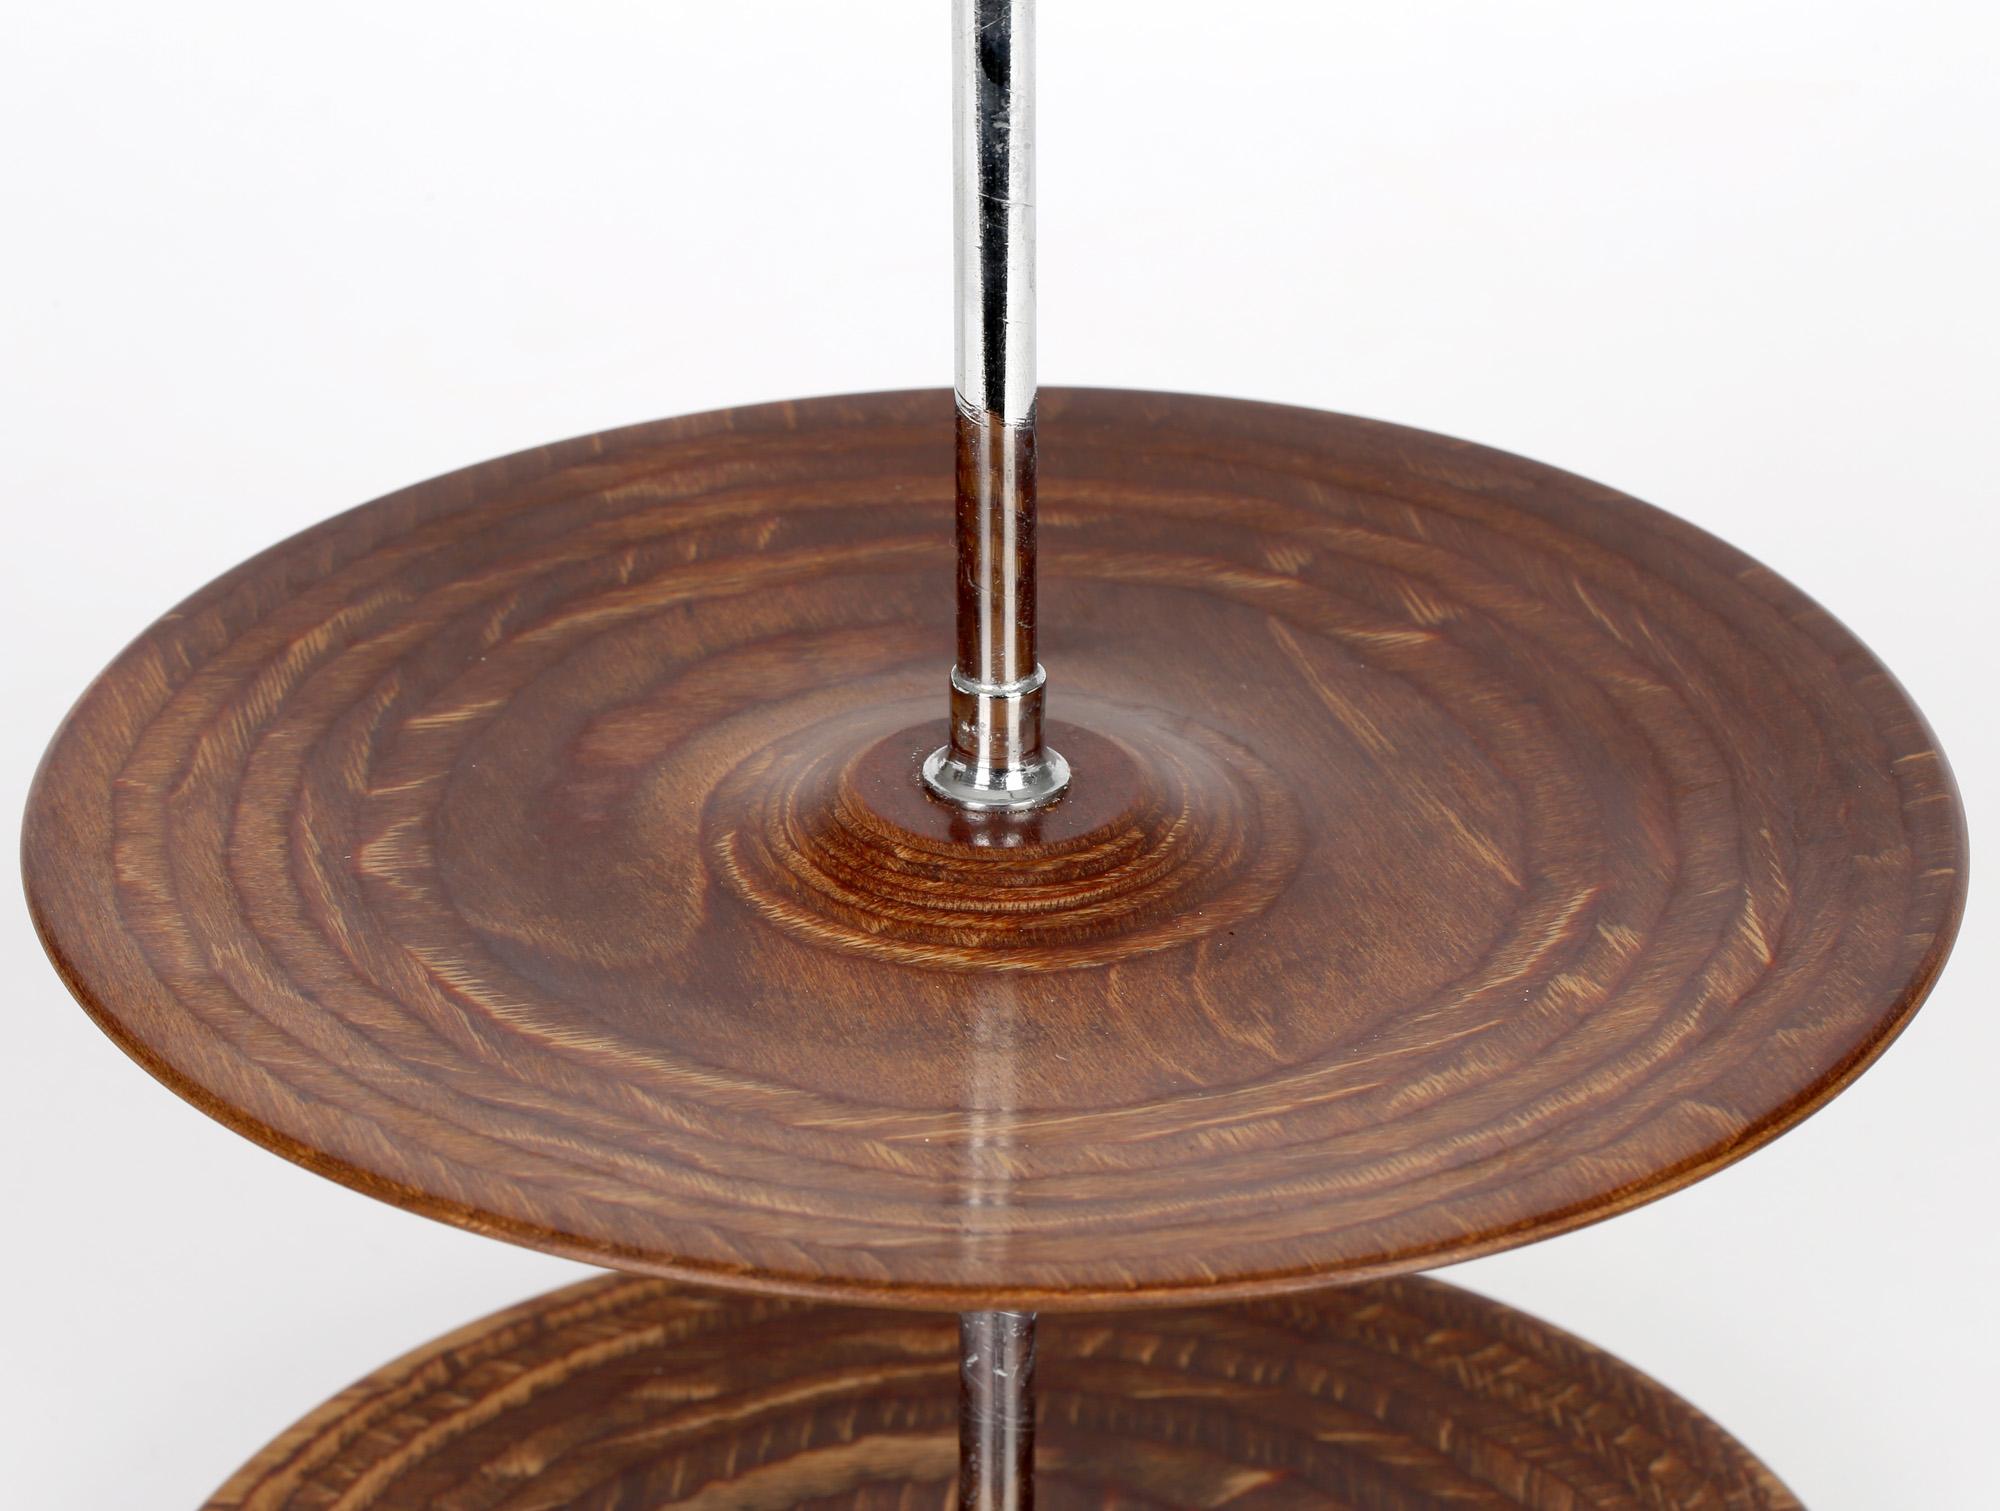 A very stylish quality mid-century, believed British, wood and chrome cake stand dating from around 1960. The cake stand is made from two rounded tiers, probably made from walnut and polished to give an interesting pattern to the grain. The two